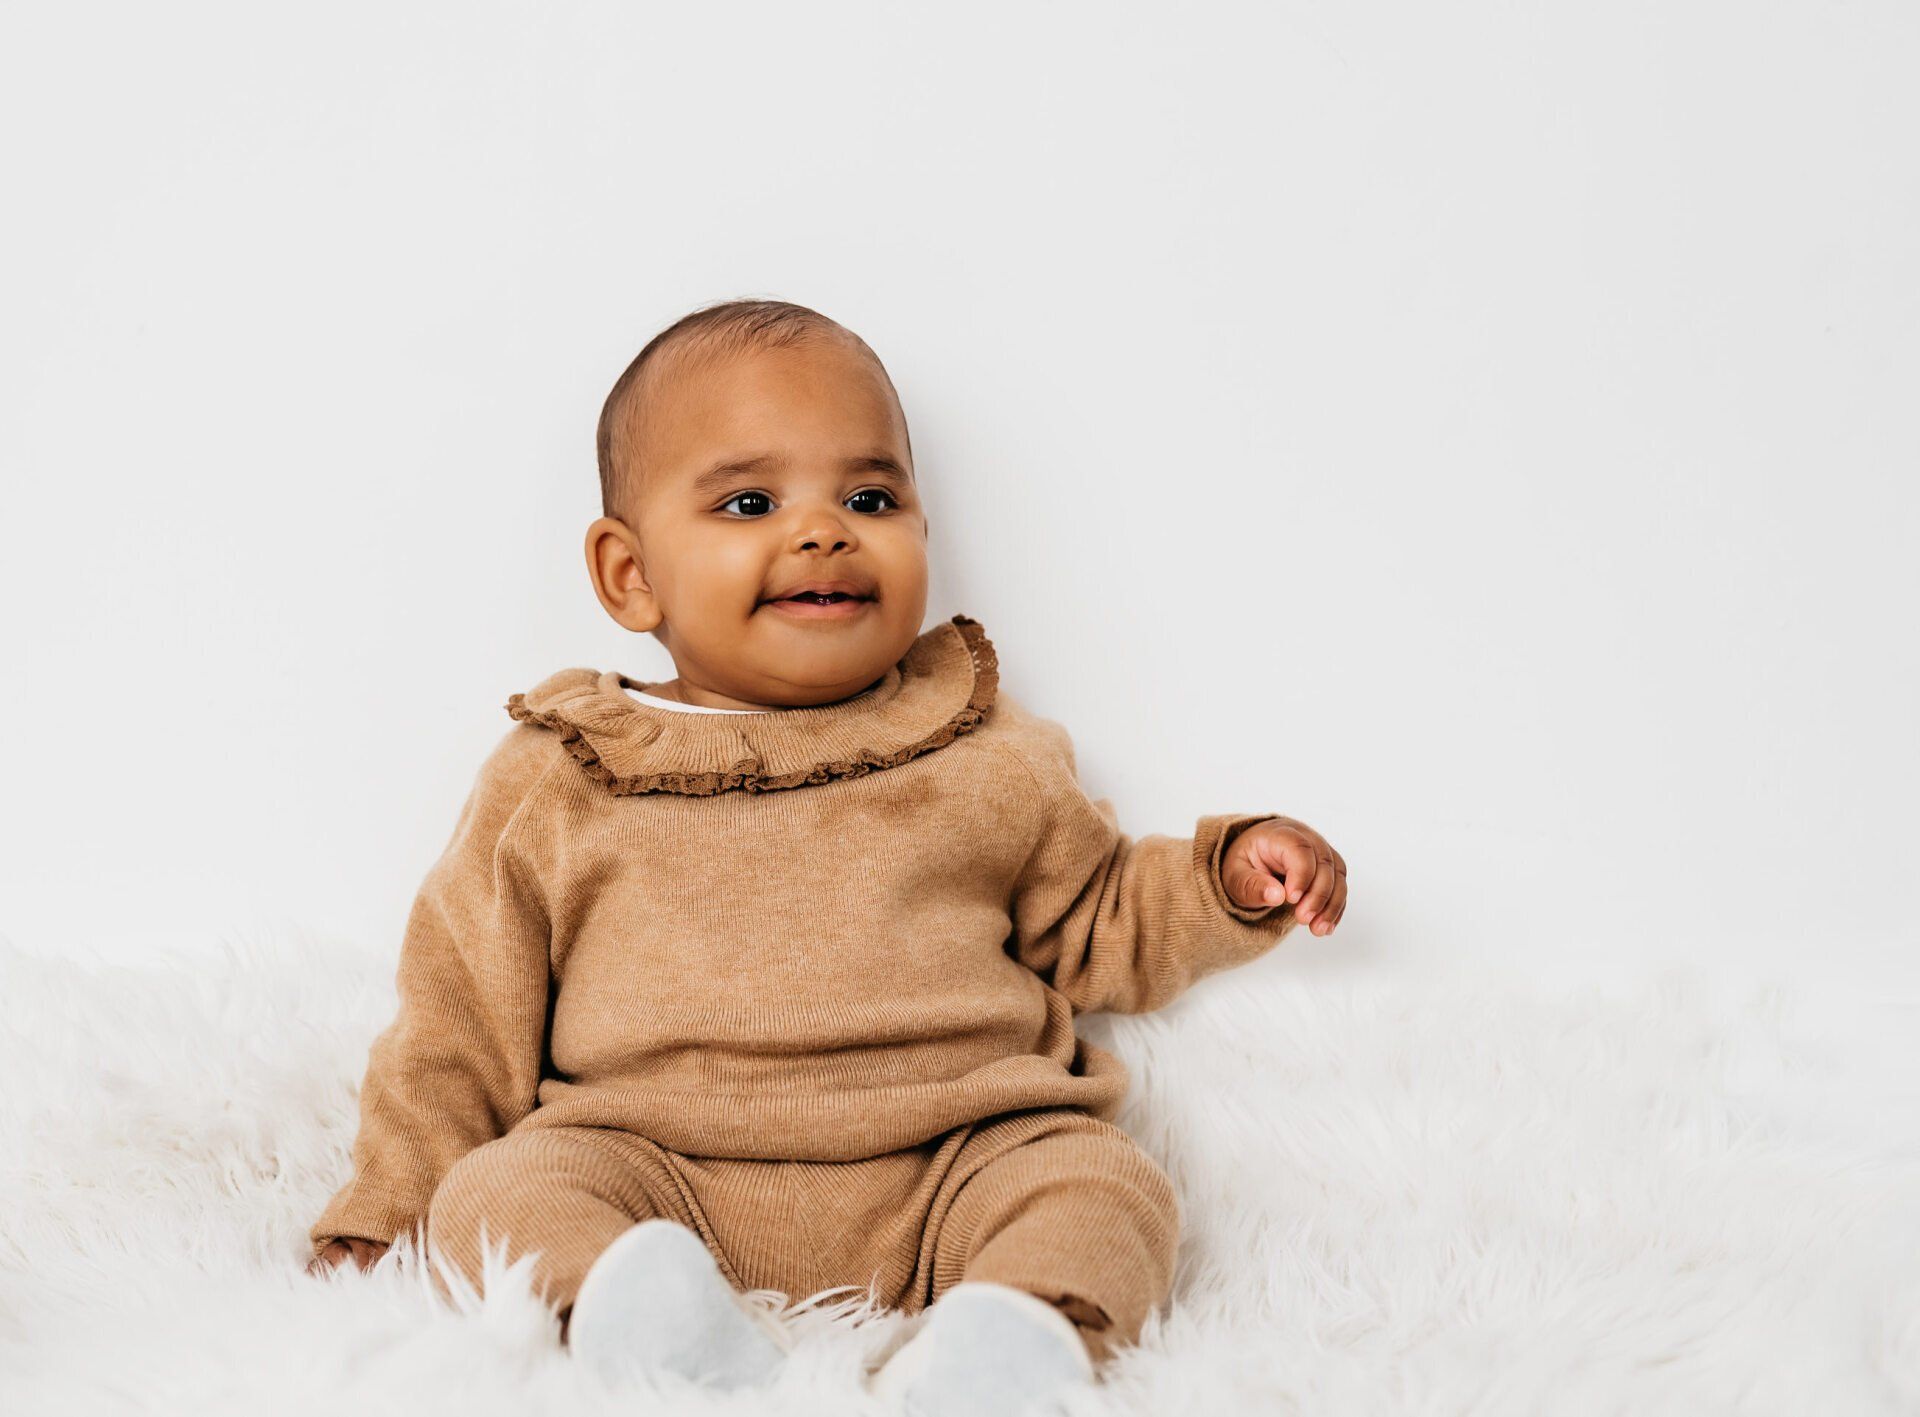 Baby sitting on fluffy white rug for lifestyle photography